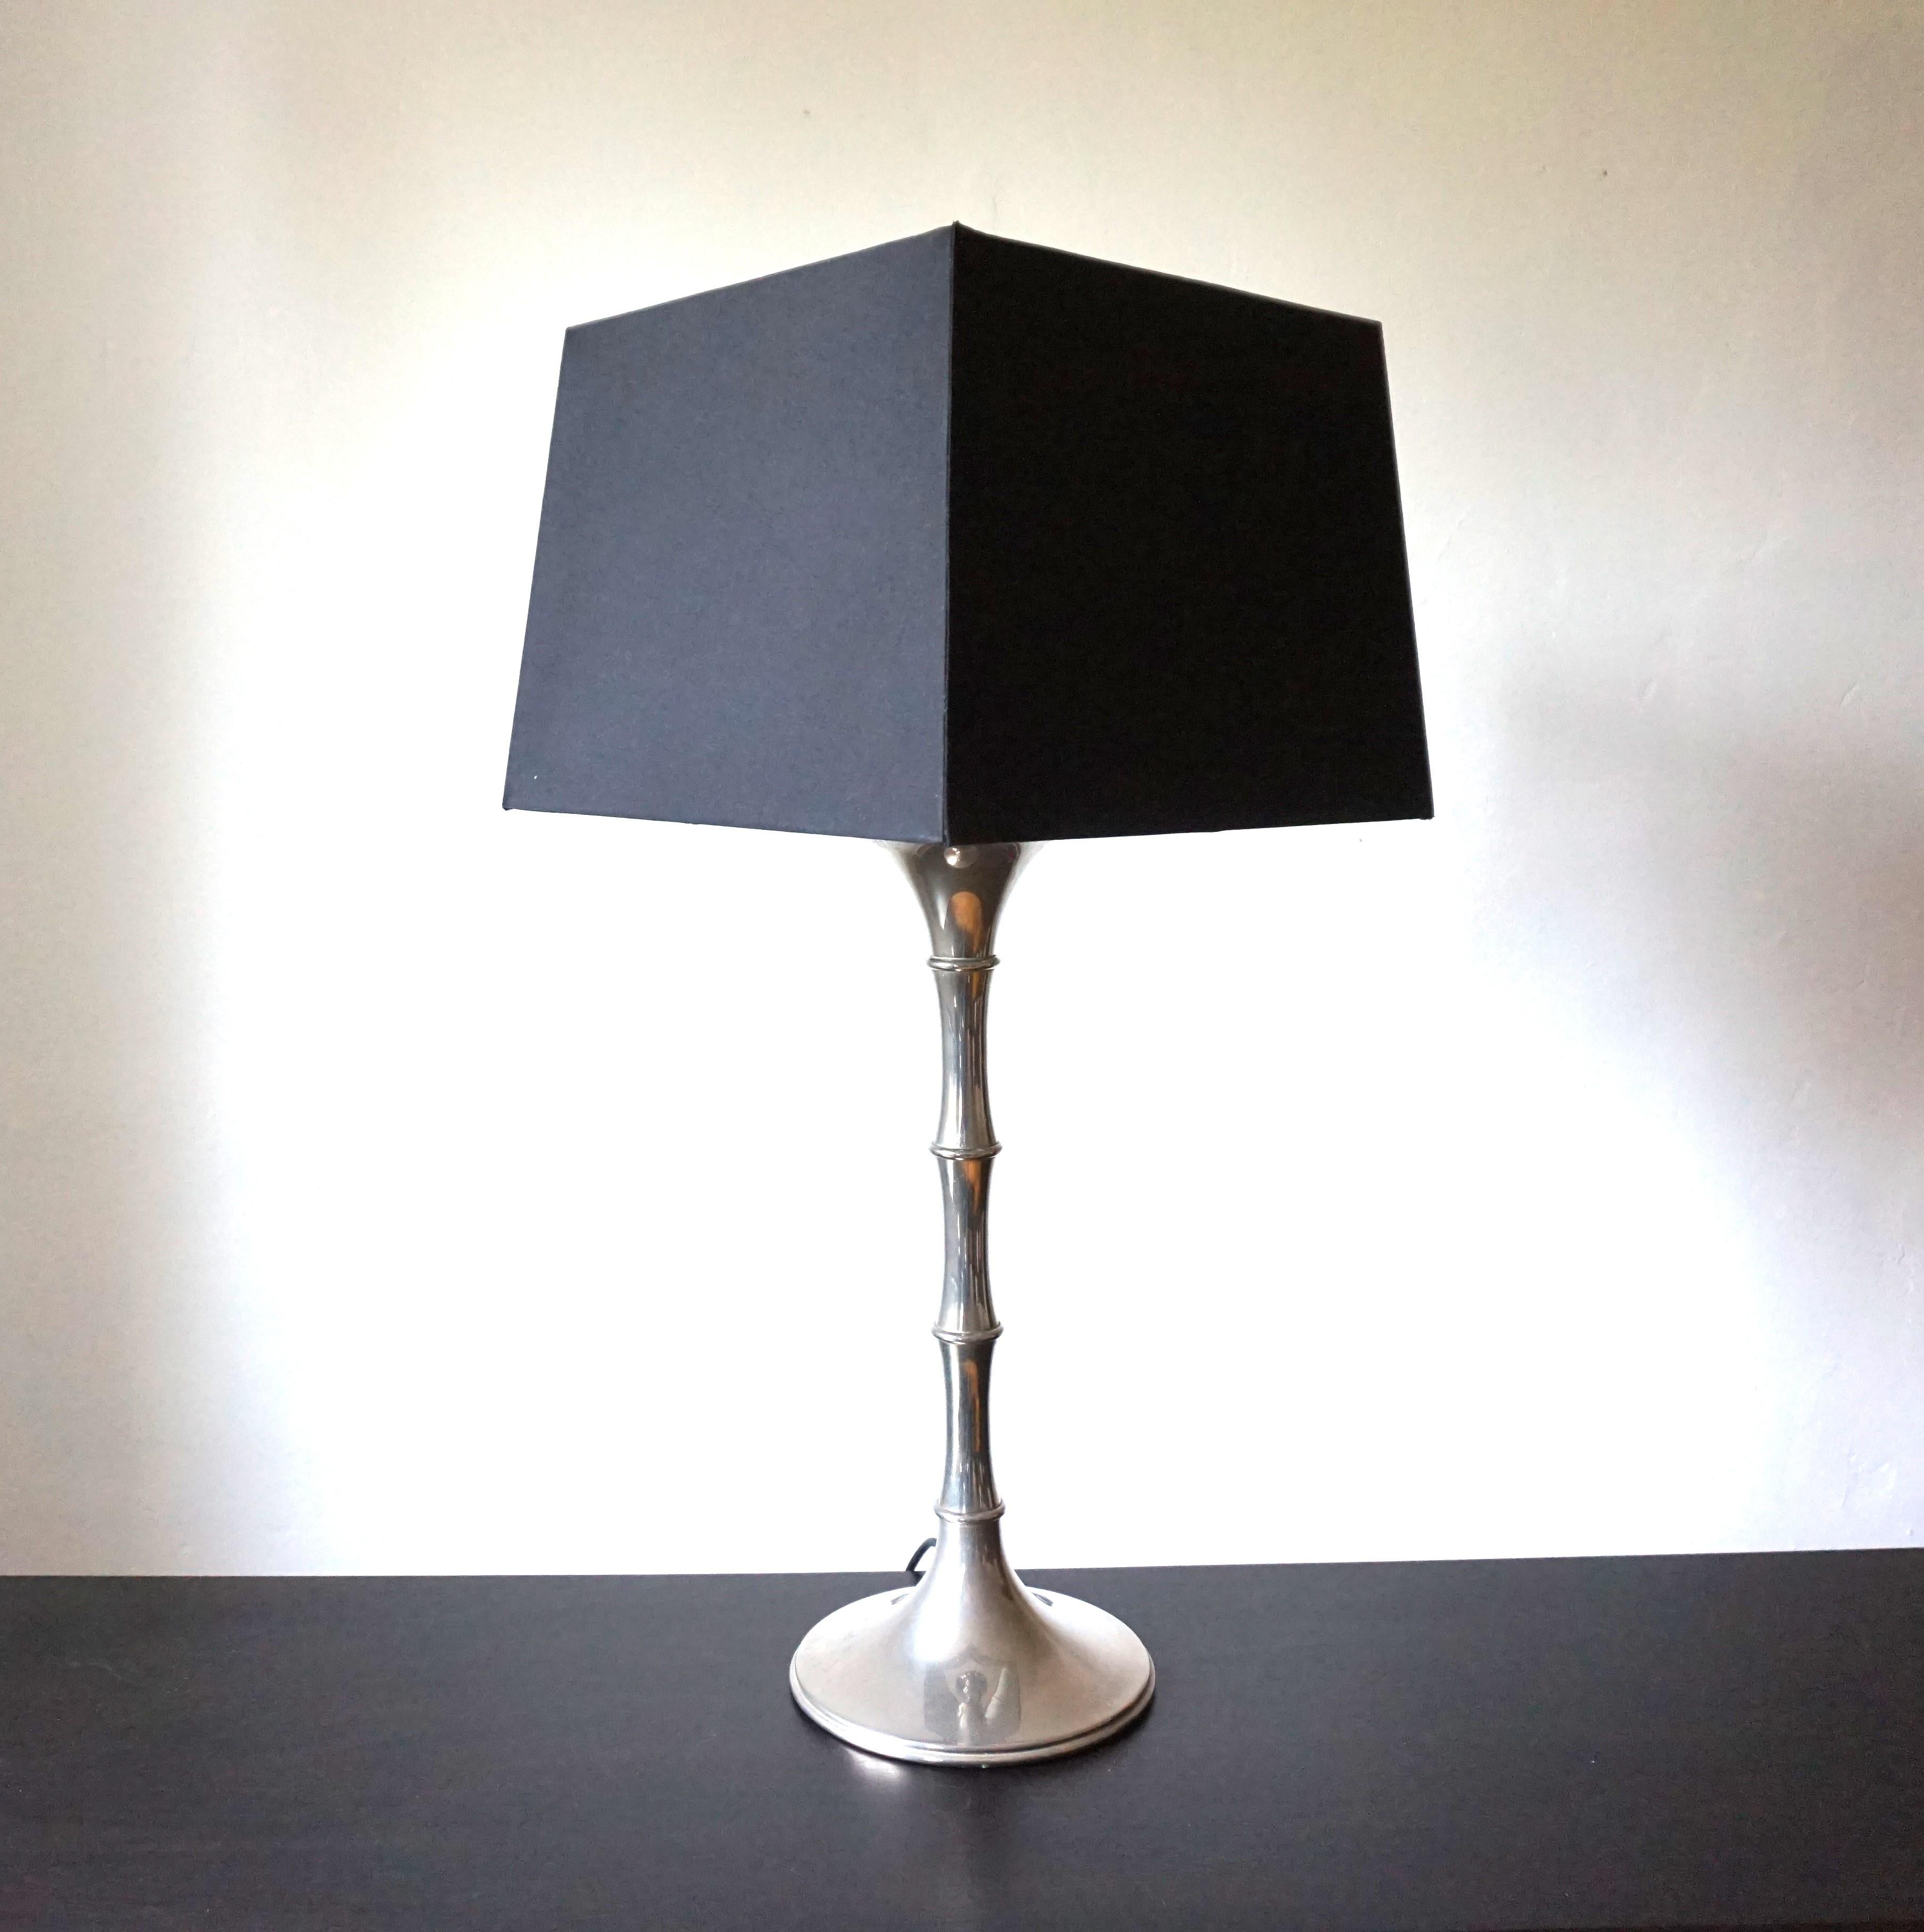 Bamboo table lamp by Ingo Maurer In Good Condition For Sale In Ludwigslust, DE